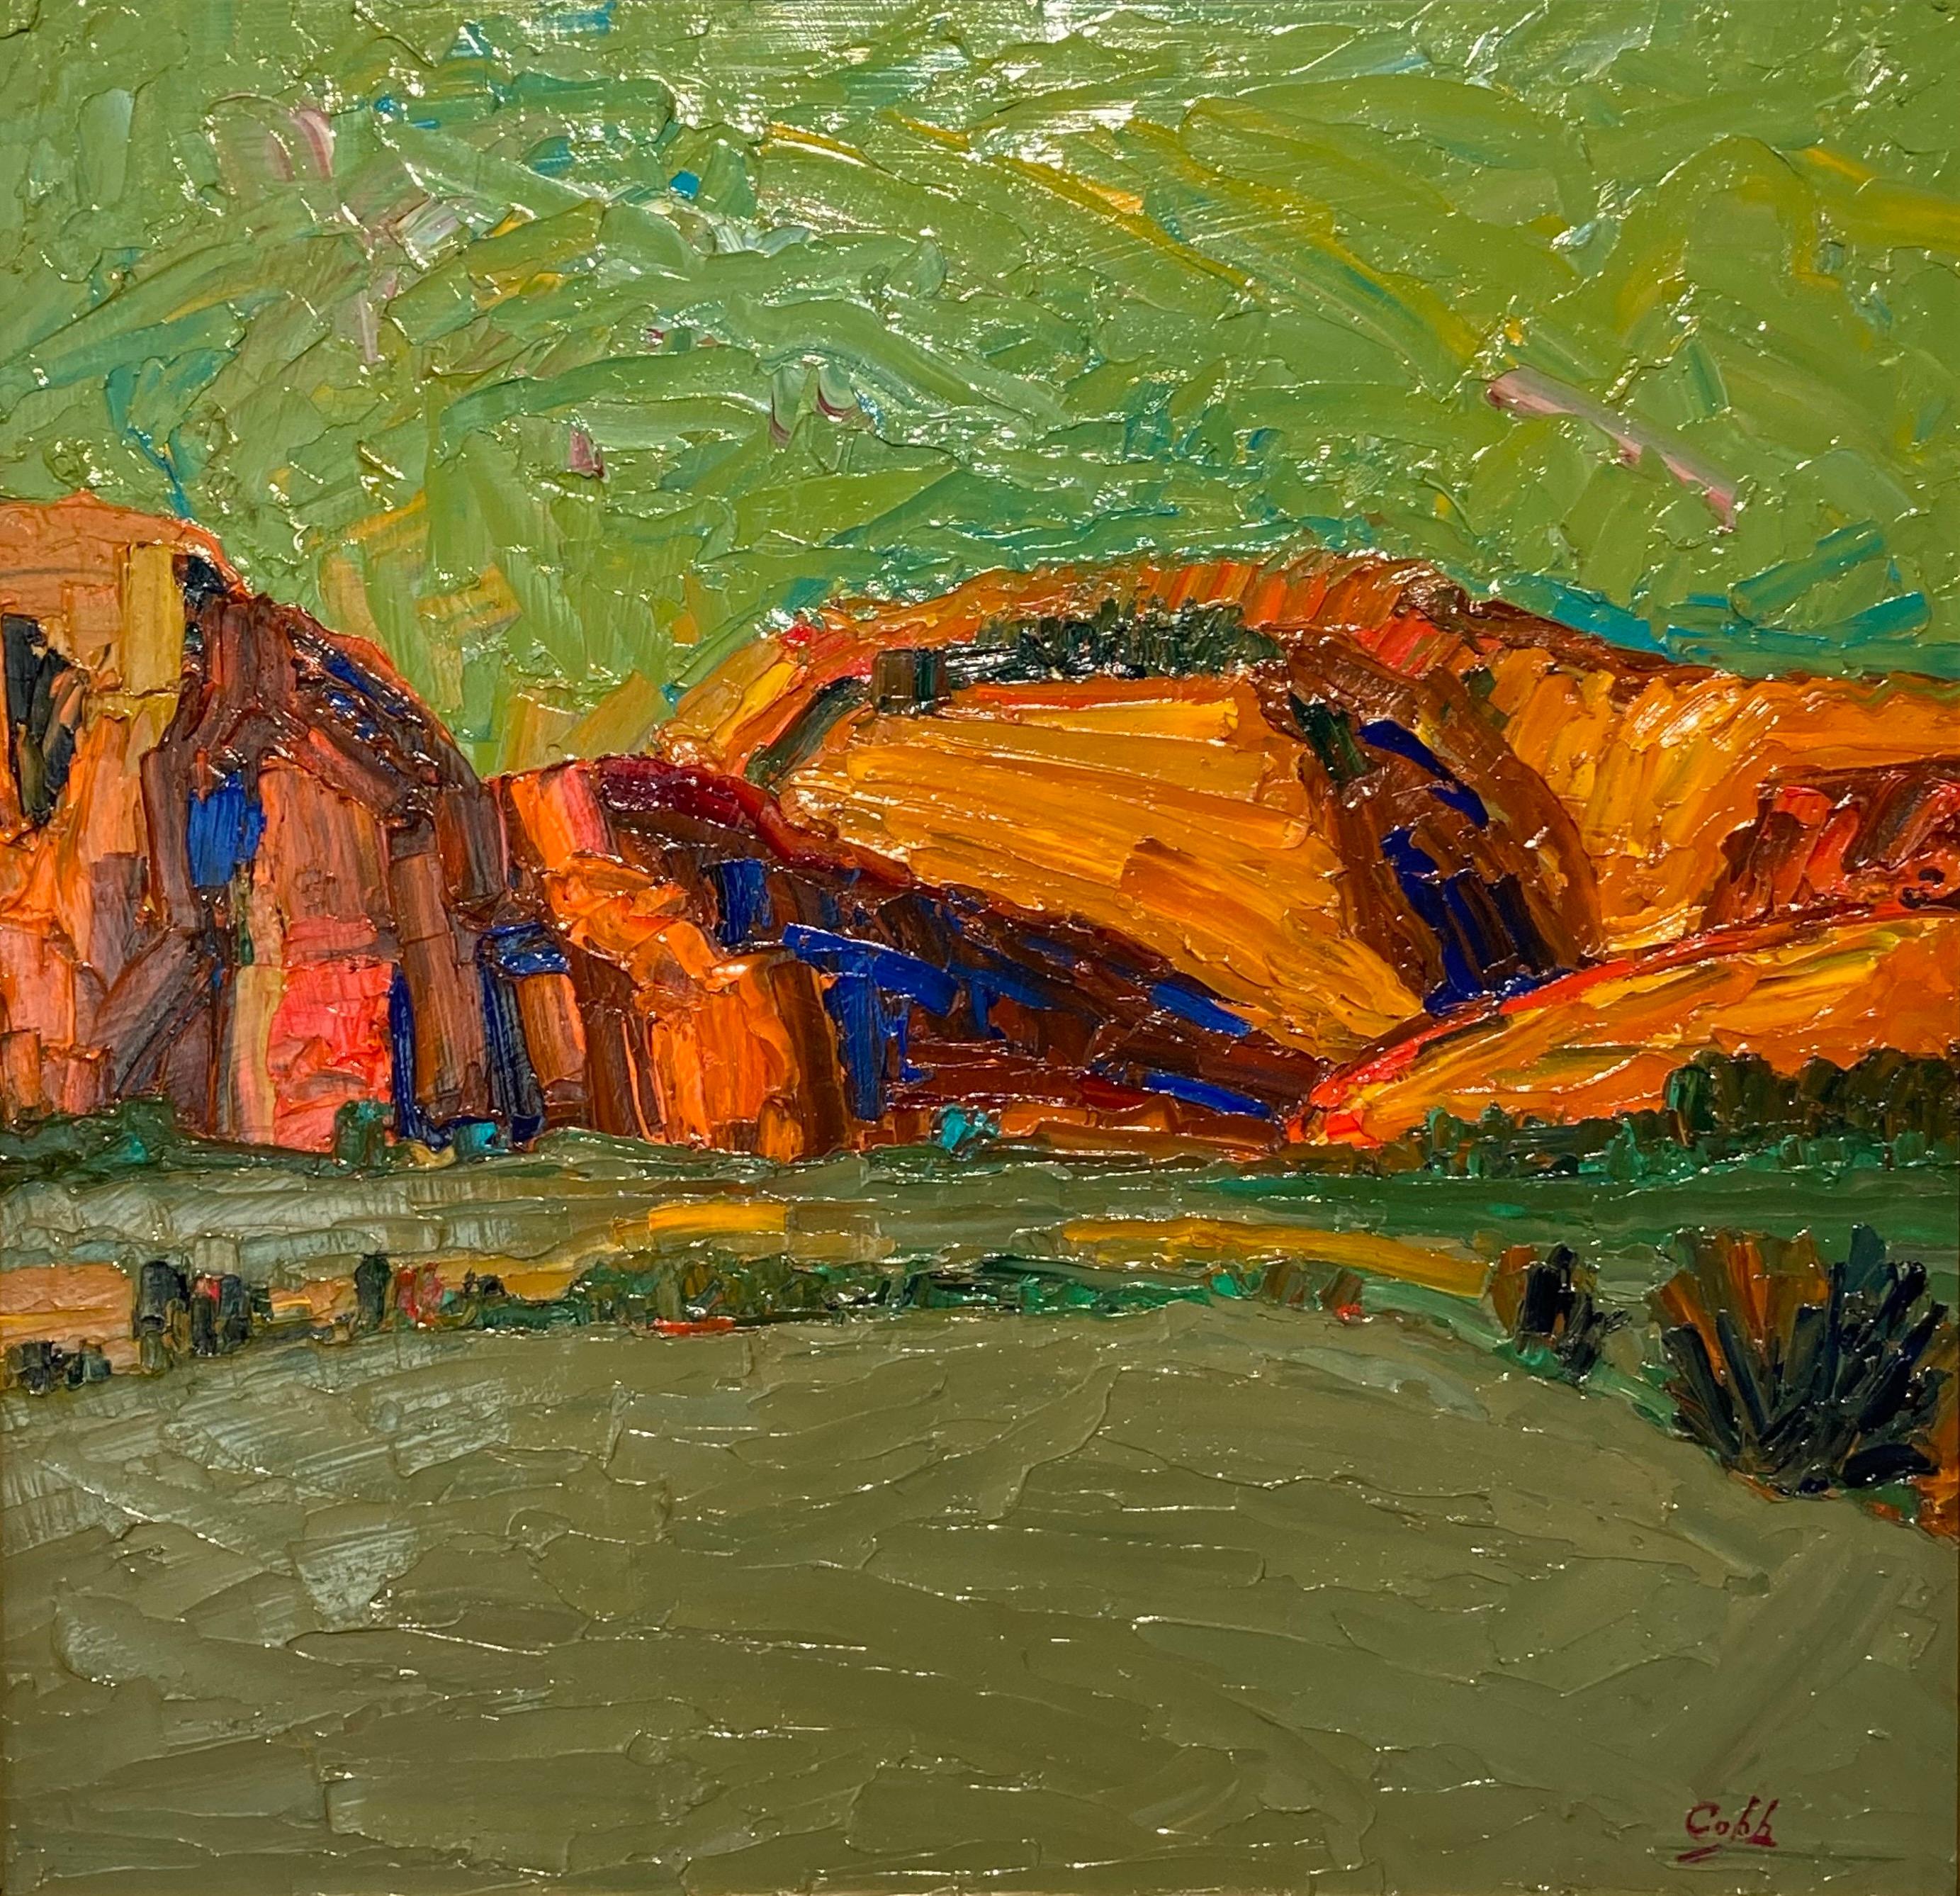 This oil on panel by artist James Cobb features the mountains prevalent along I-40 West while traveling to Arizona. The mountain is captured in the unique shades of brown, red, and orange typical under the southwest sun. The artist uses deep tones